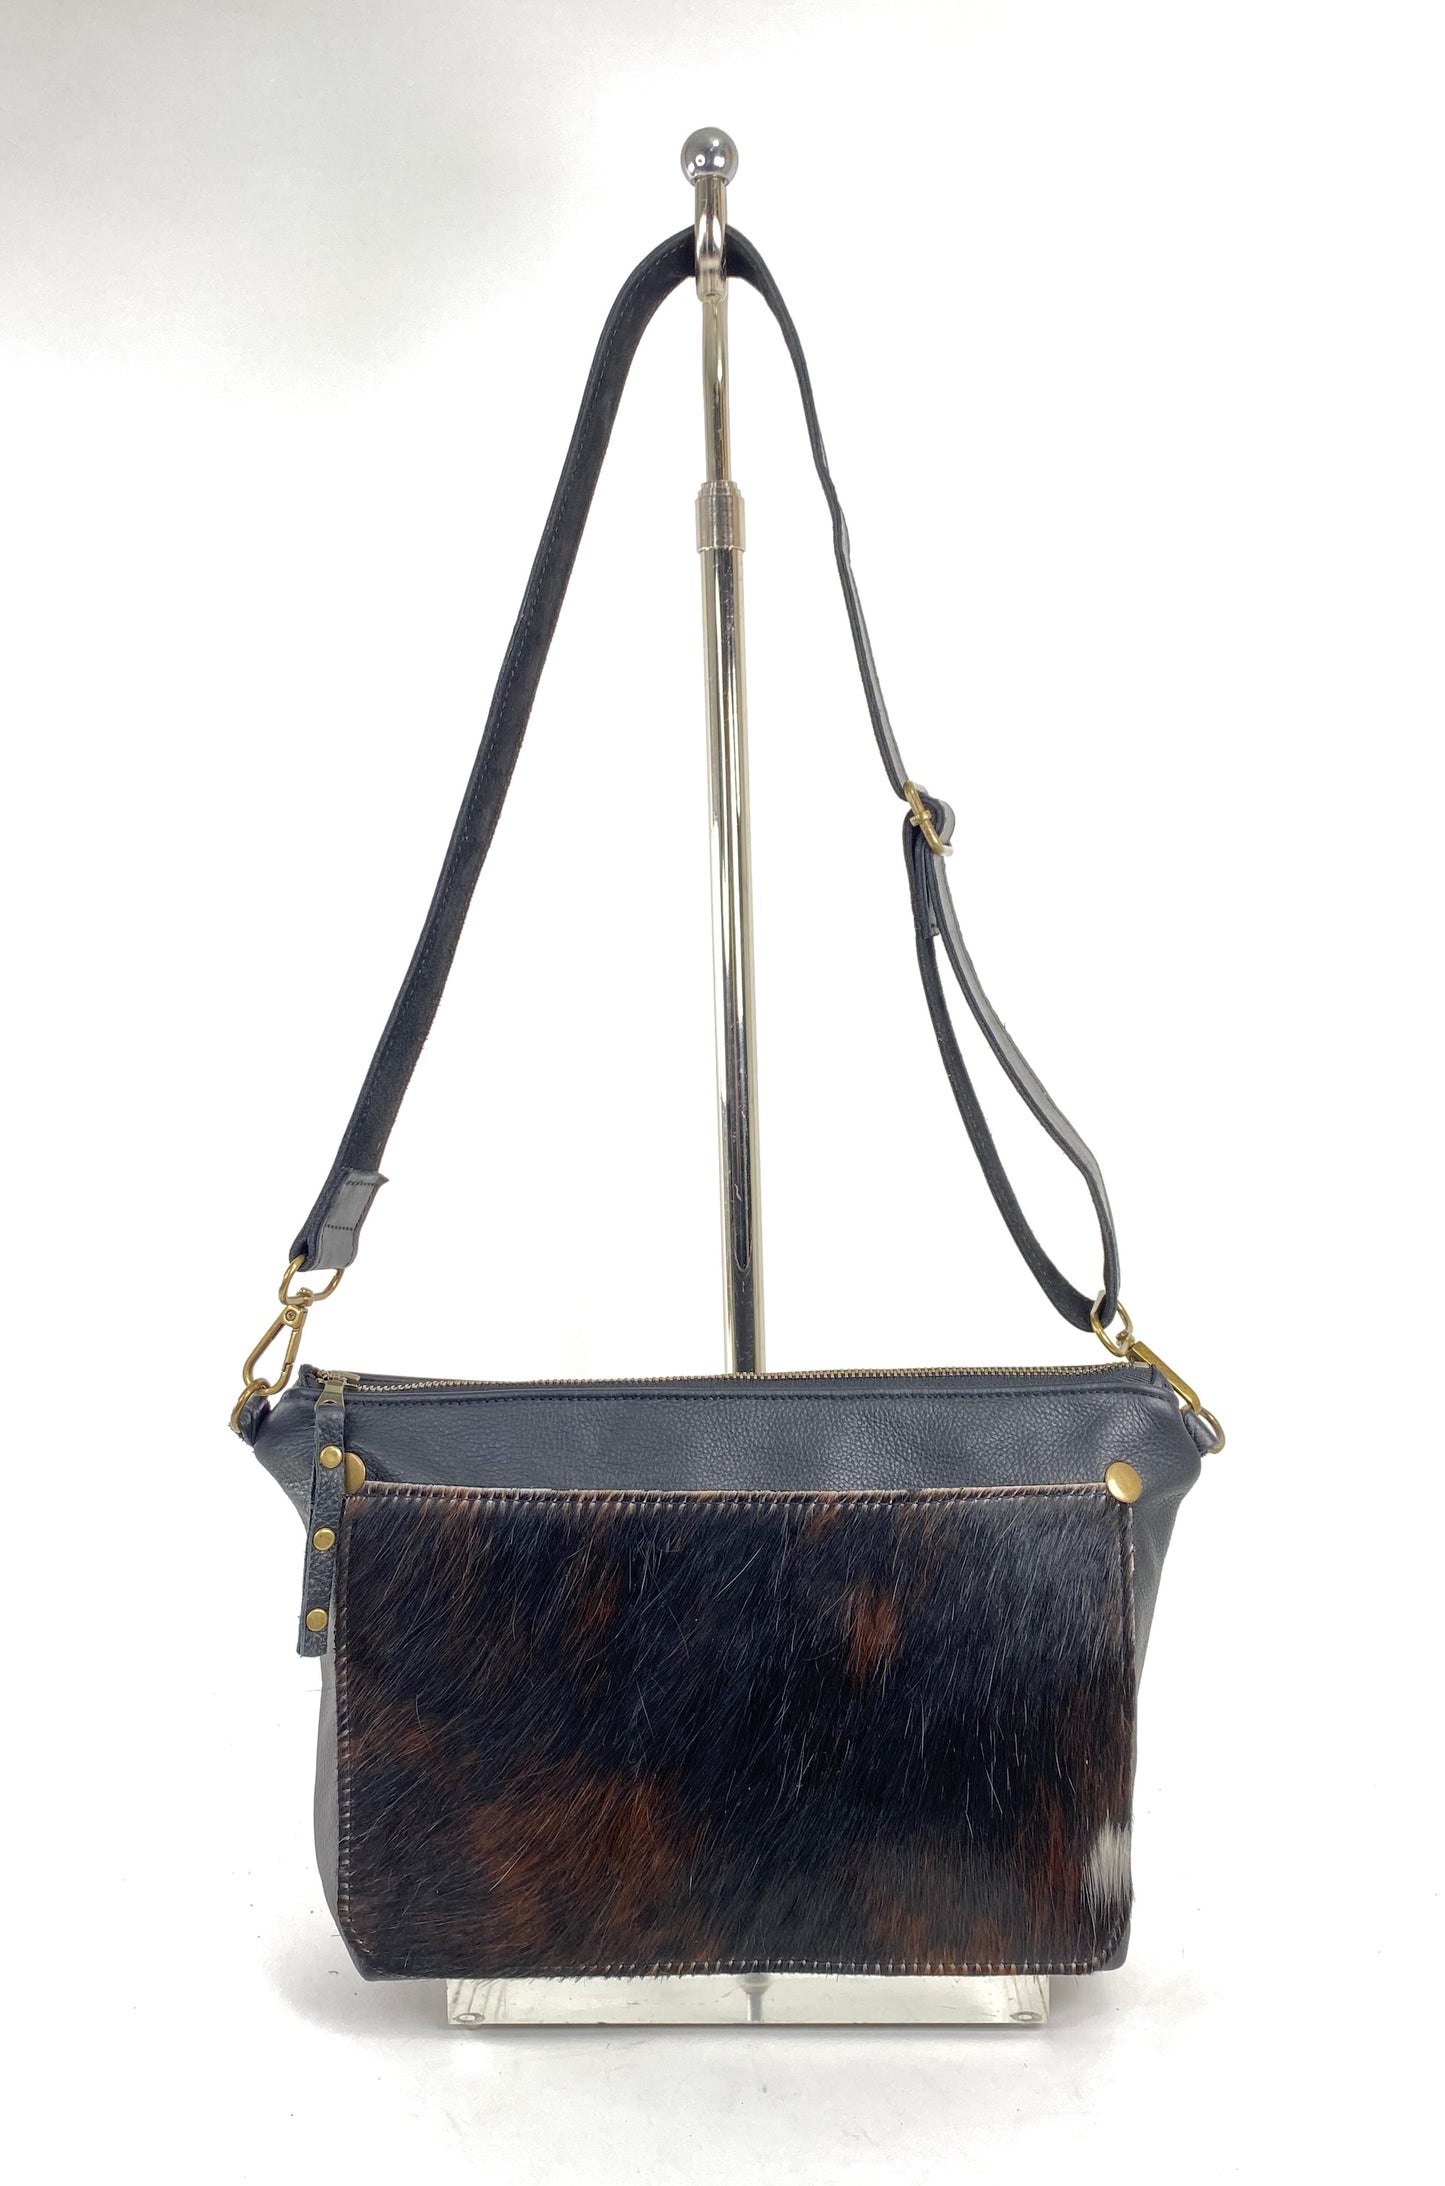 Black Leather Shoulder Purse with Hair-On Cowhide Accent